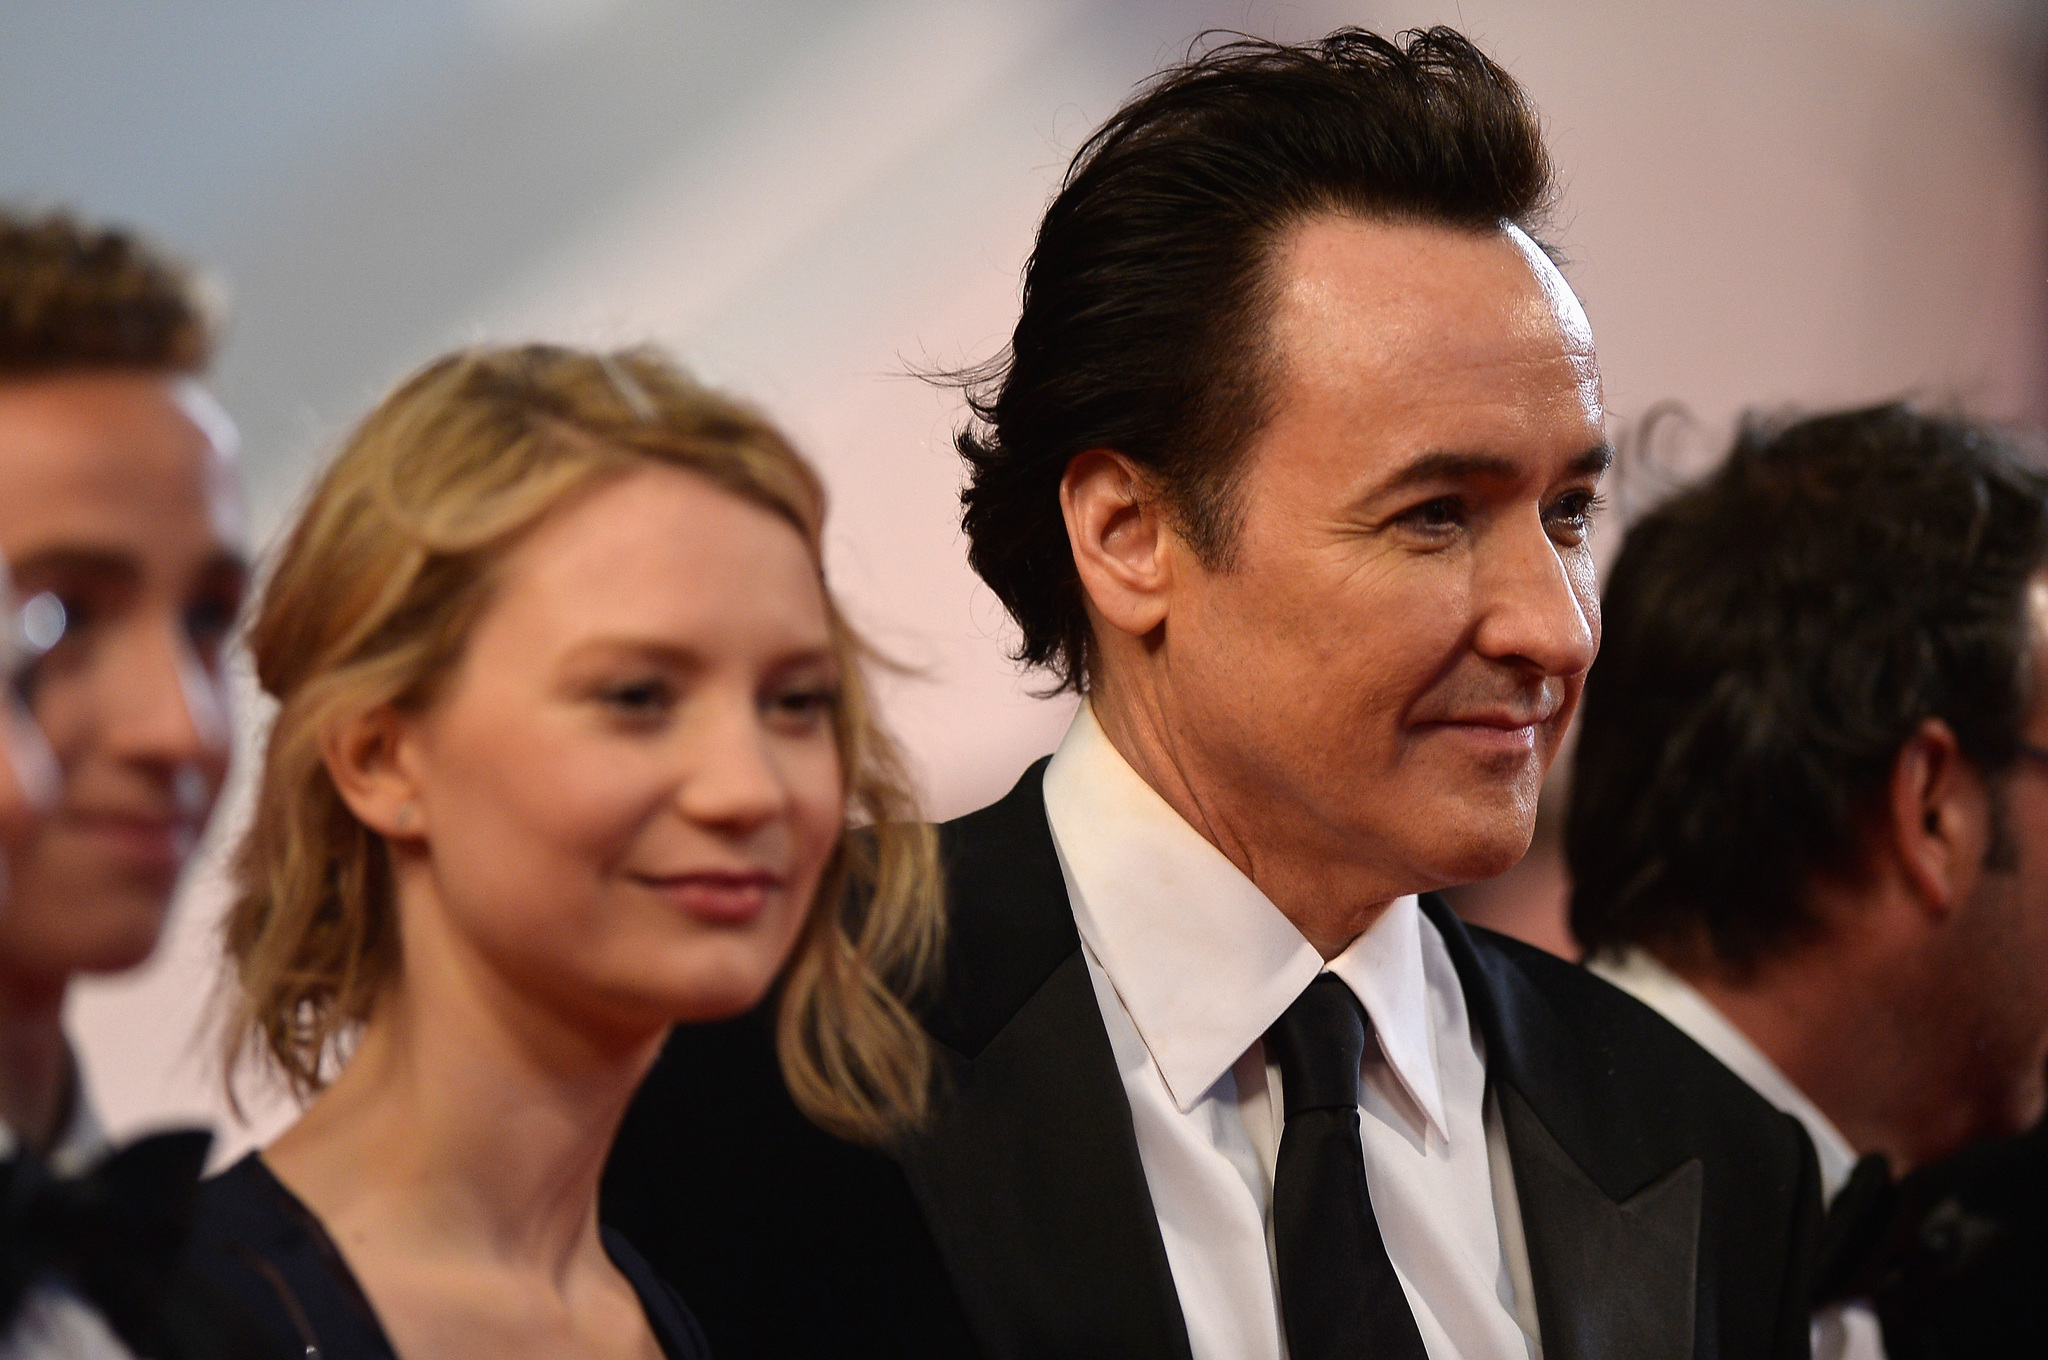 John Cusack and Mia Wasikowska at event of Maps to the Stars (2014)